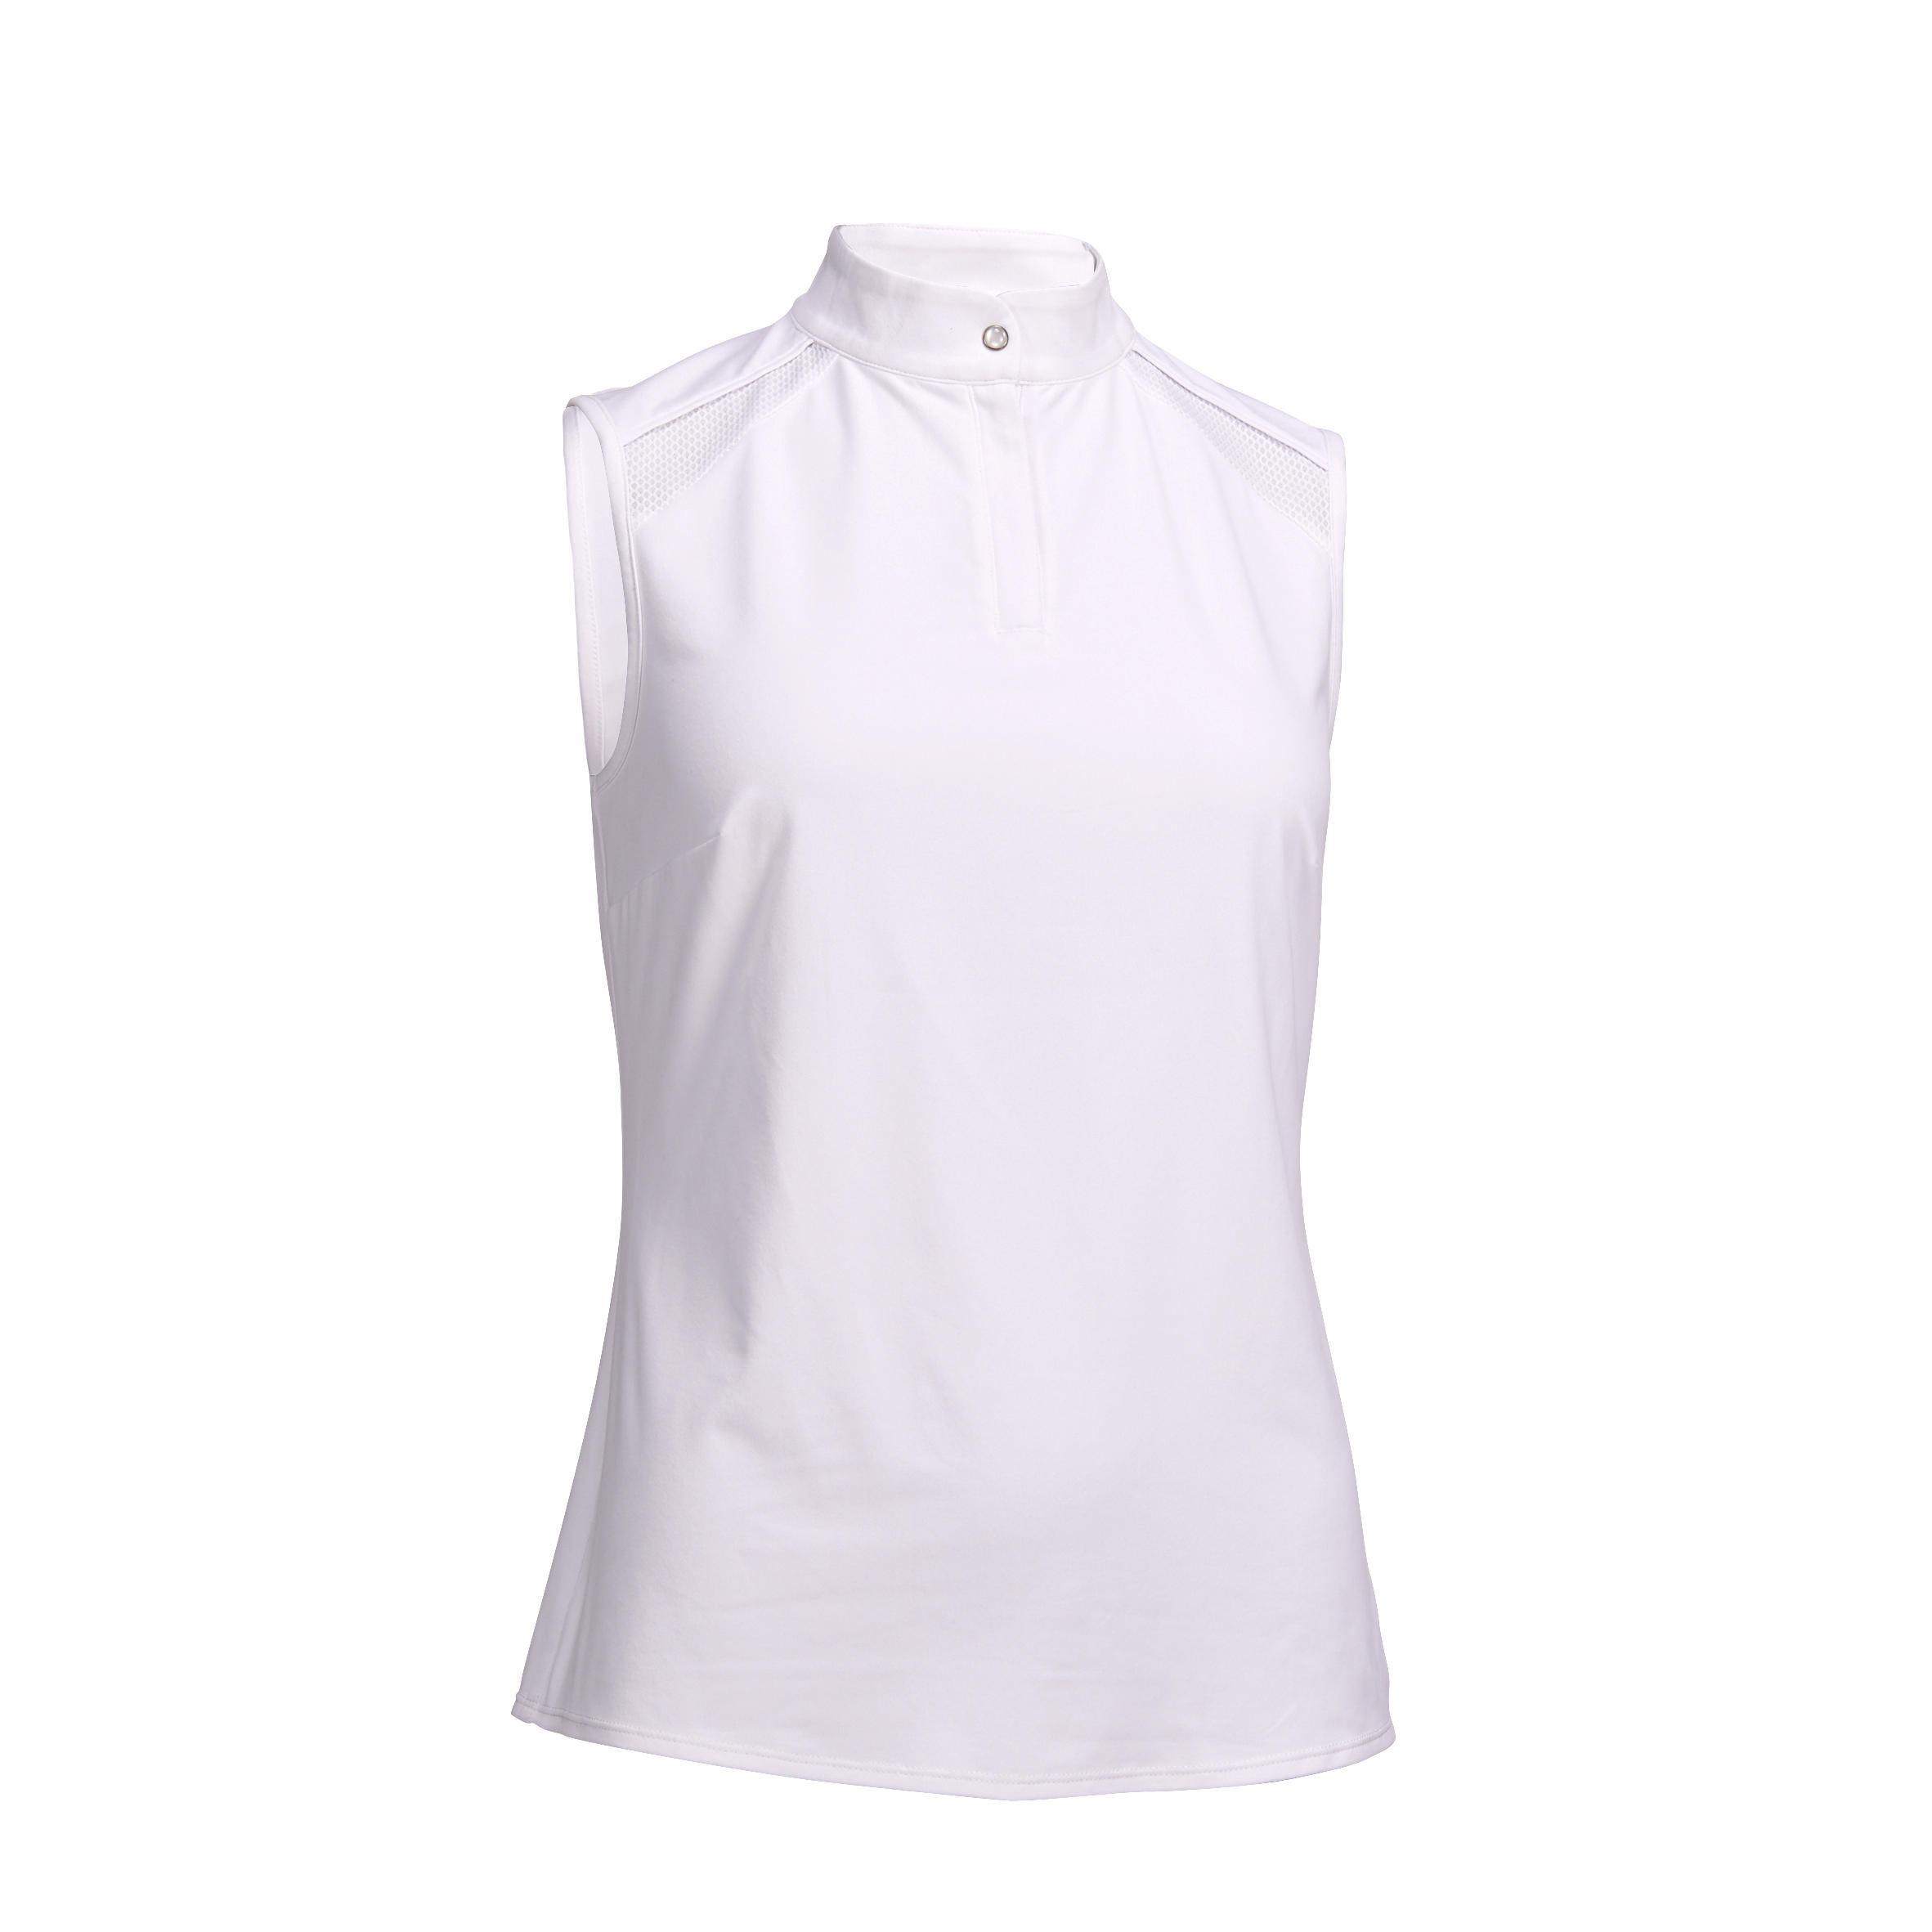 500 Women's Horse Riding Competition Tank Top - White • SPORTAIGER